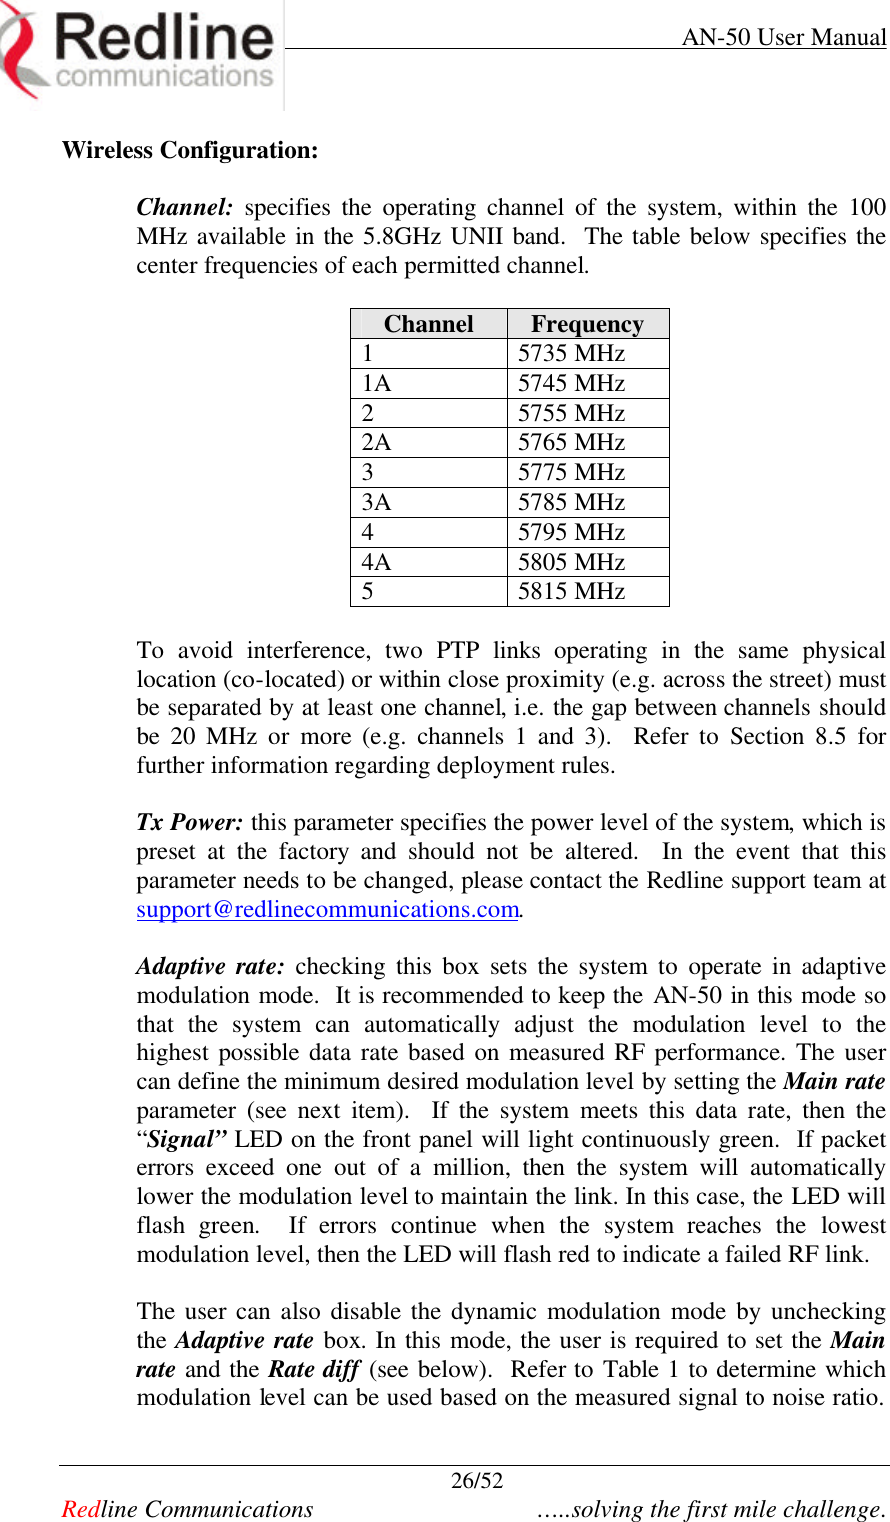     AN-50 User Manual  26/52   Redline Communications    …..solving the first mile challenge. Wireless Configuration:  Channel: specifies  the  operating  channel  of the system, within the 100 MHz available in the 5.8GHz UNII band.  The table below specifies the  center frequencies of each permitted channel.  Channel Frequency 1 5735 MHz 1A 5745 MHz 2 5755 MHz 2A 5765 MHz 3 5775 MHz 3A 5785 MHz 4 5795 MHz 4A 5805 MHz 5 5815 MHz  To avoid interference, two  PTP  links operating in the same physical location (co-located) or within close proximity (e.g. across the street) must be separated by at least one channel, i.e. the gap between channels should be  20 MHz  or more (e.g. channels 1 and 3).  Refer  to  Section  8.5 for further information regarding deployment rules.    Tx Power: this parameter specifies the power level of the system, which is preset at the factory and should not be altered.  In the event that this parameter needs to be changed, please contact the Redline support team at support@redlinecommunications.com.   Adaptive rate: checking this box sets  the system  to operate in adaptive modulation mode.  It is recommended to keep the AN-50 in this mode so that the system can automatically adjust  the  modulation level to  the highest possible  data rate based on measured RF performance. The user can define the minimum desired modulation level by setting the Main rate parameter (see next item).  If the system meets this data rate, then the “Signal” LED on the front panel will light continuously green.  If packet errors exceed one out of a million,  then  the system will  automatically lower the modulation level to maintain the link. In this case, the LED will  flash green.  If errors continue when the system reaches the lowest modulation level, then the LED will flash red to indicate a failed RF link.   The user can also disable the dynamic modulation mode by unchecking the Adaptive rate box. In this mode, the user is required to set the Main rate and the Rate diff (see below).  Refer to Table 1 to determine which modulation level can be used based on the measured signal to noise ratio.  